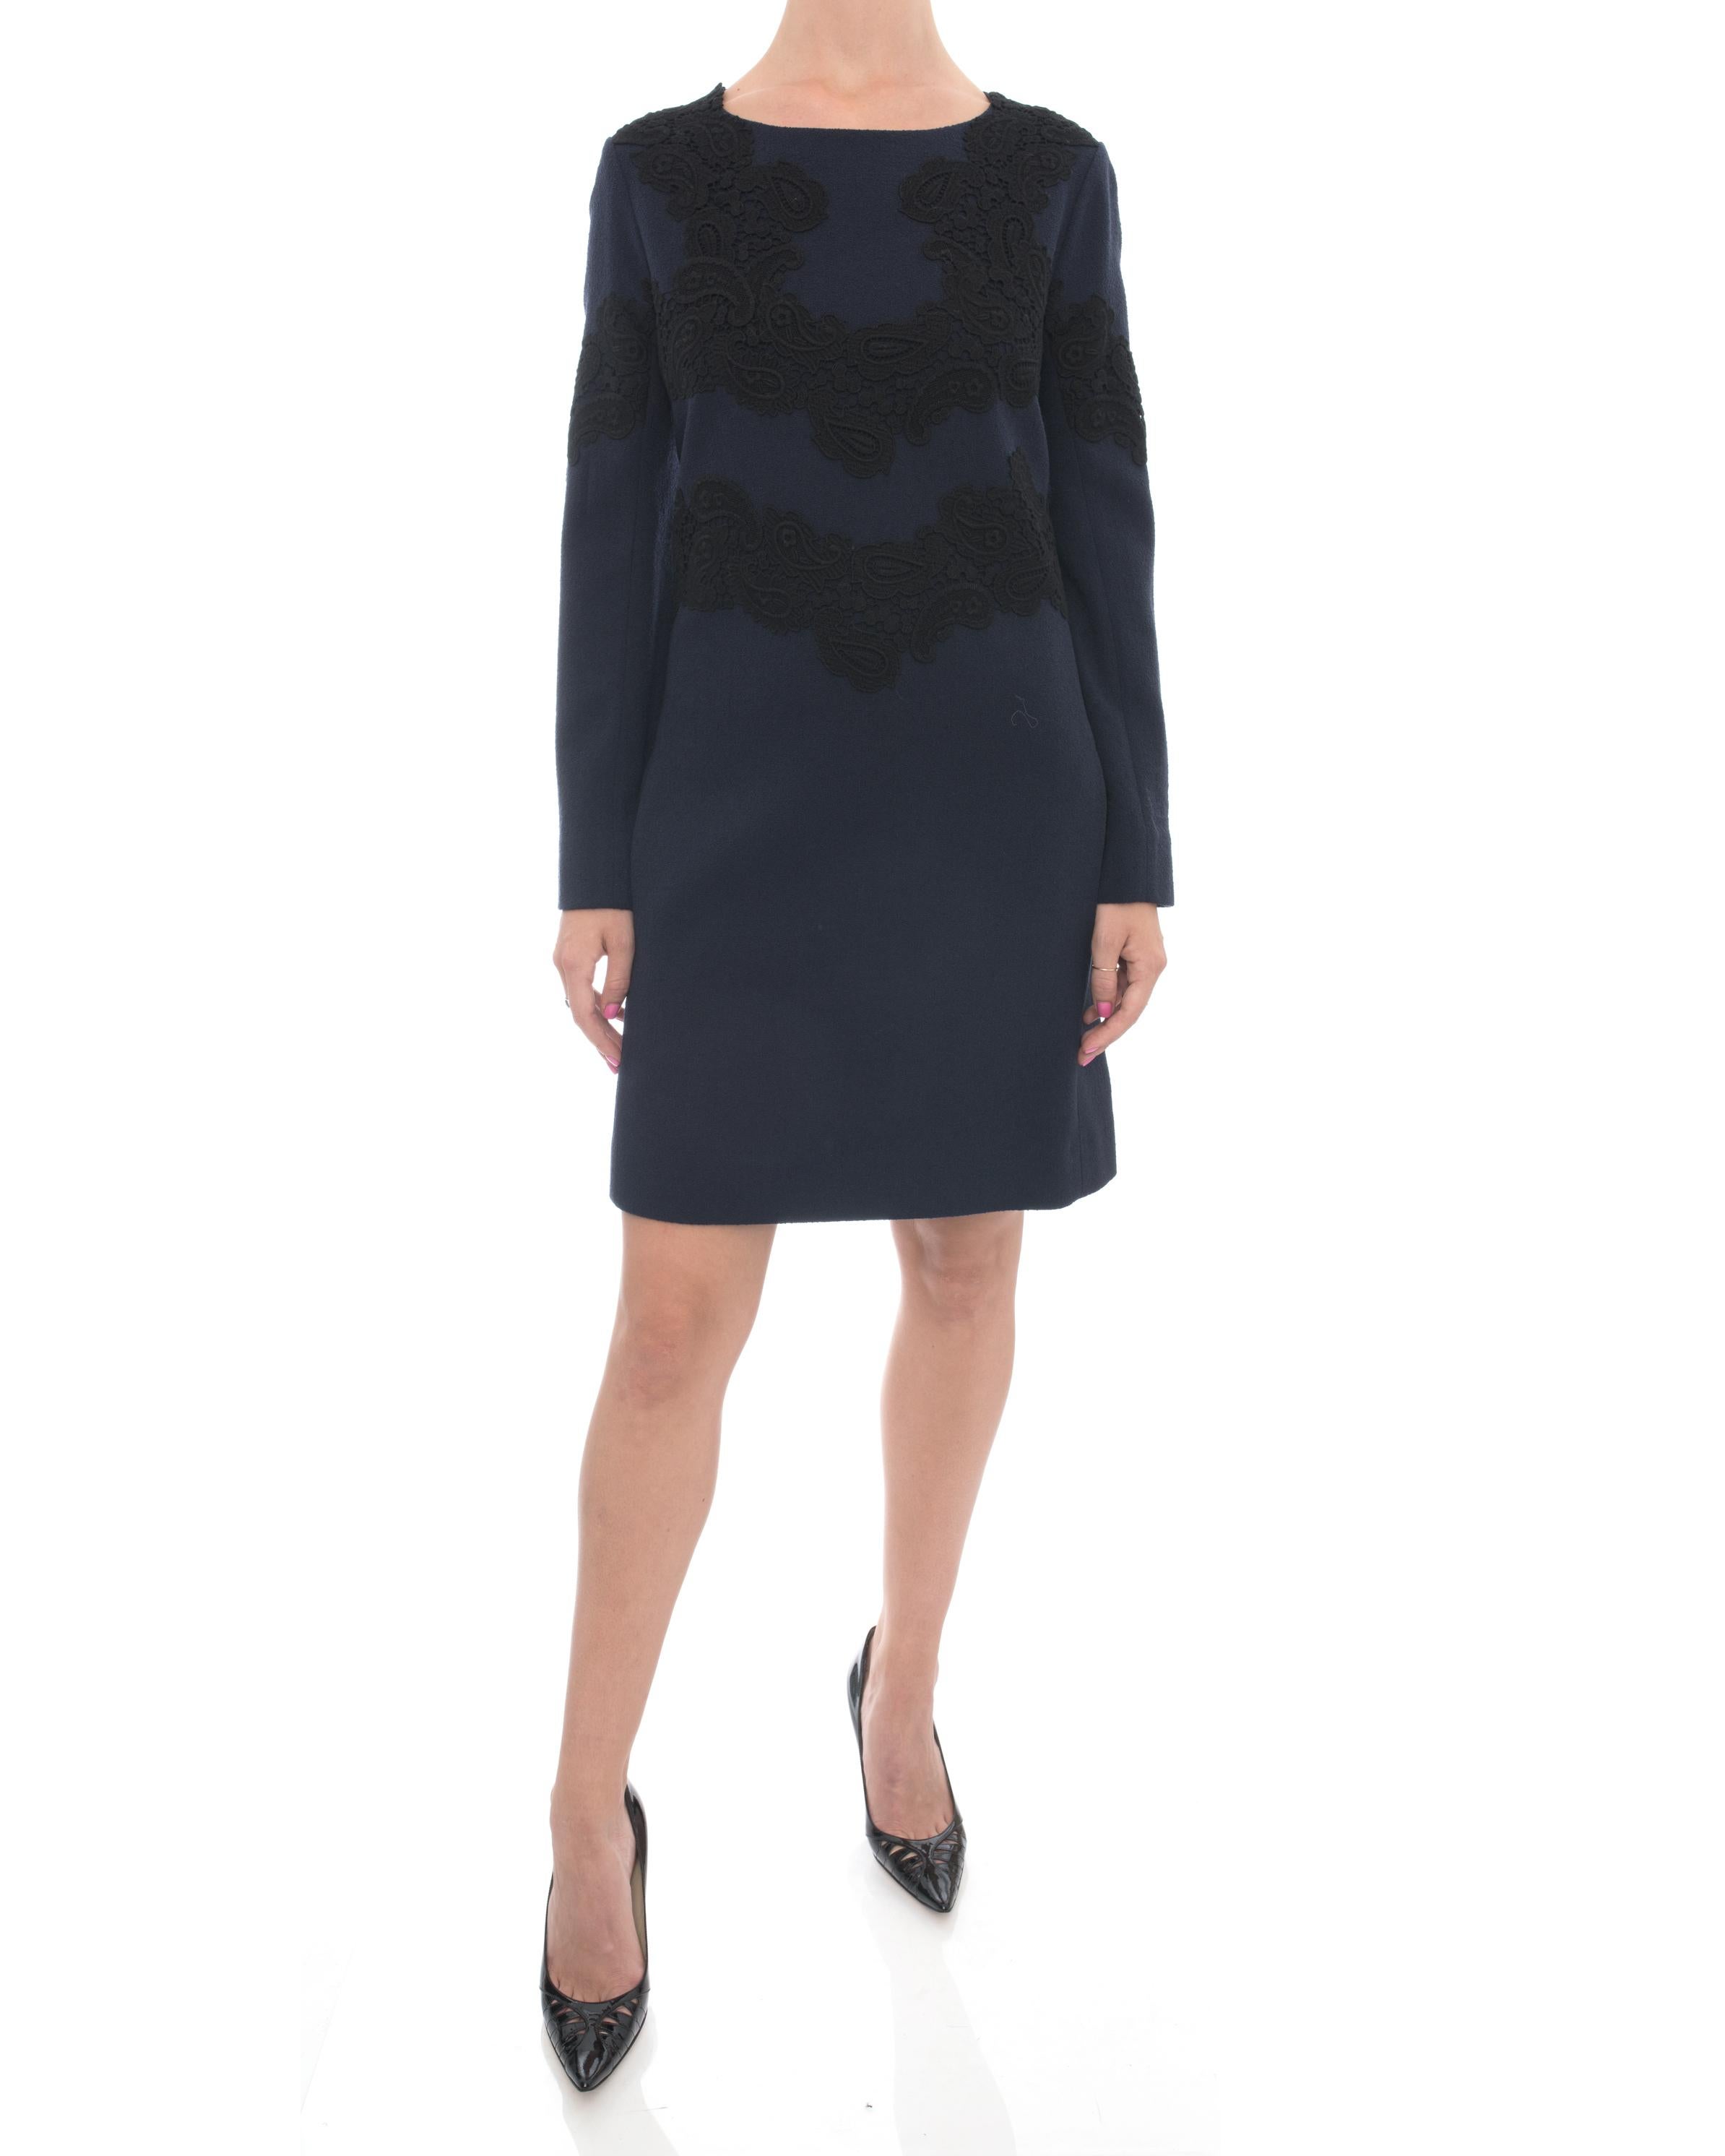 Chloe Navy Wool Long Sleeve Dress with Black Lace applique.  Circa fall 2015 collection. Straight cut body, front side pockets on seam, centre back zipper, silk lined.  Marked size FR 38 (USA 6). Garment bust measures 36” and is recommended to be